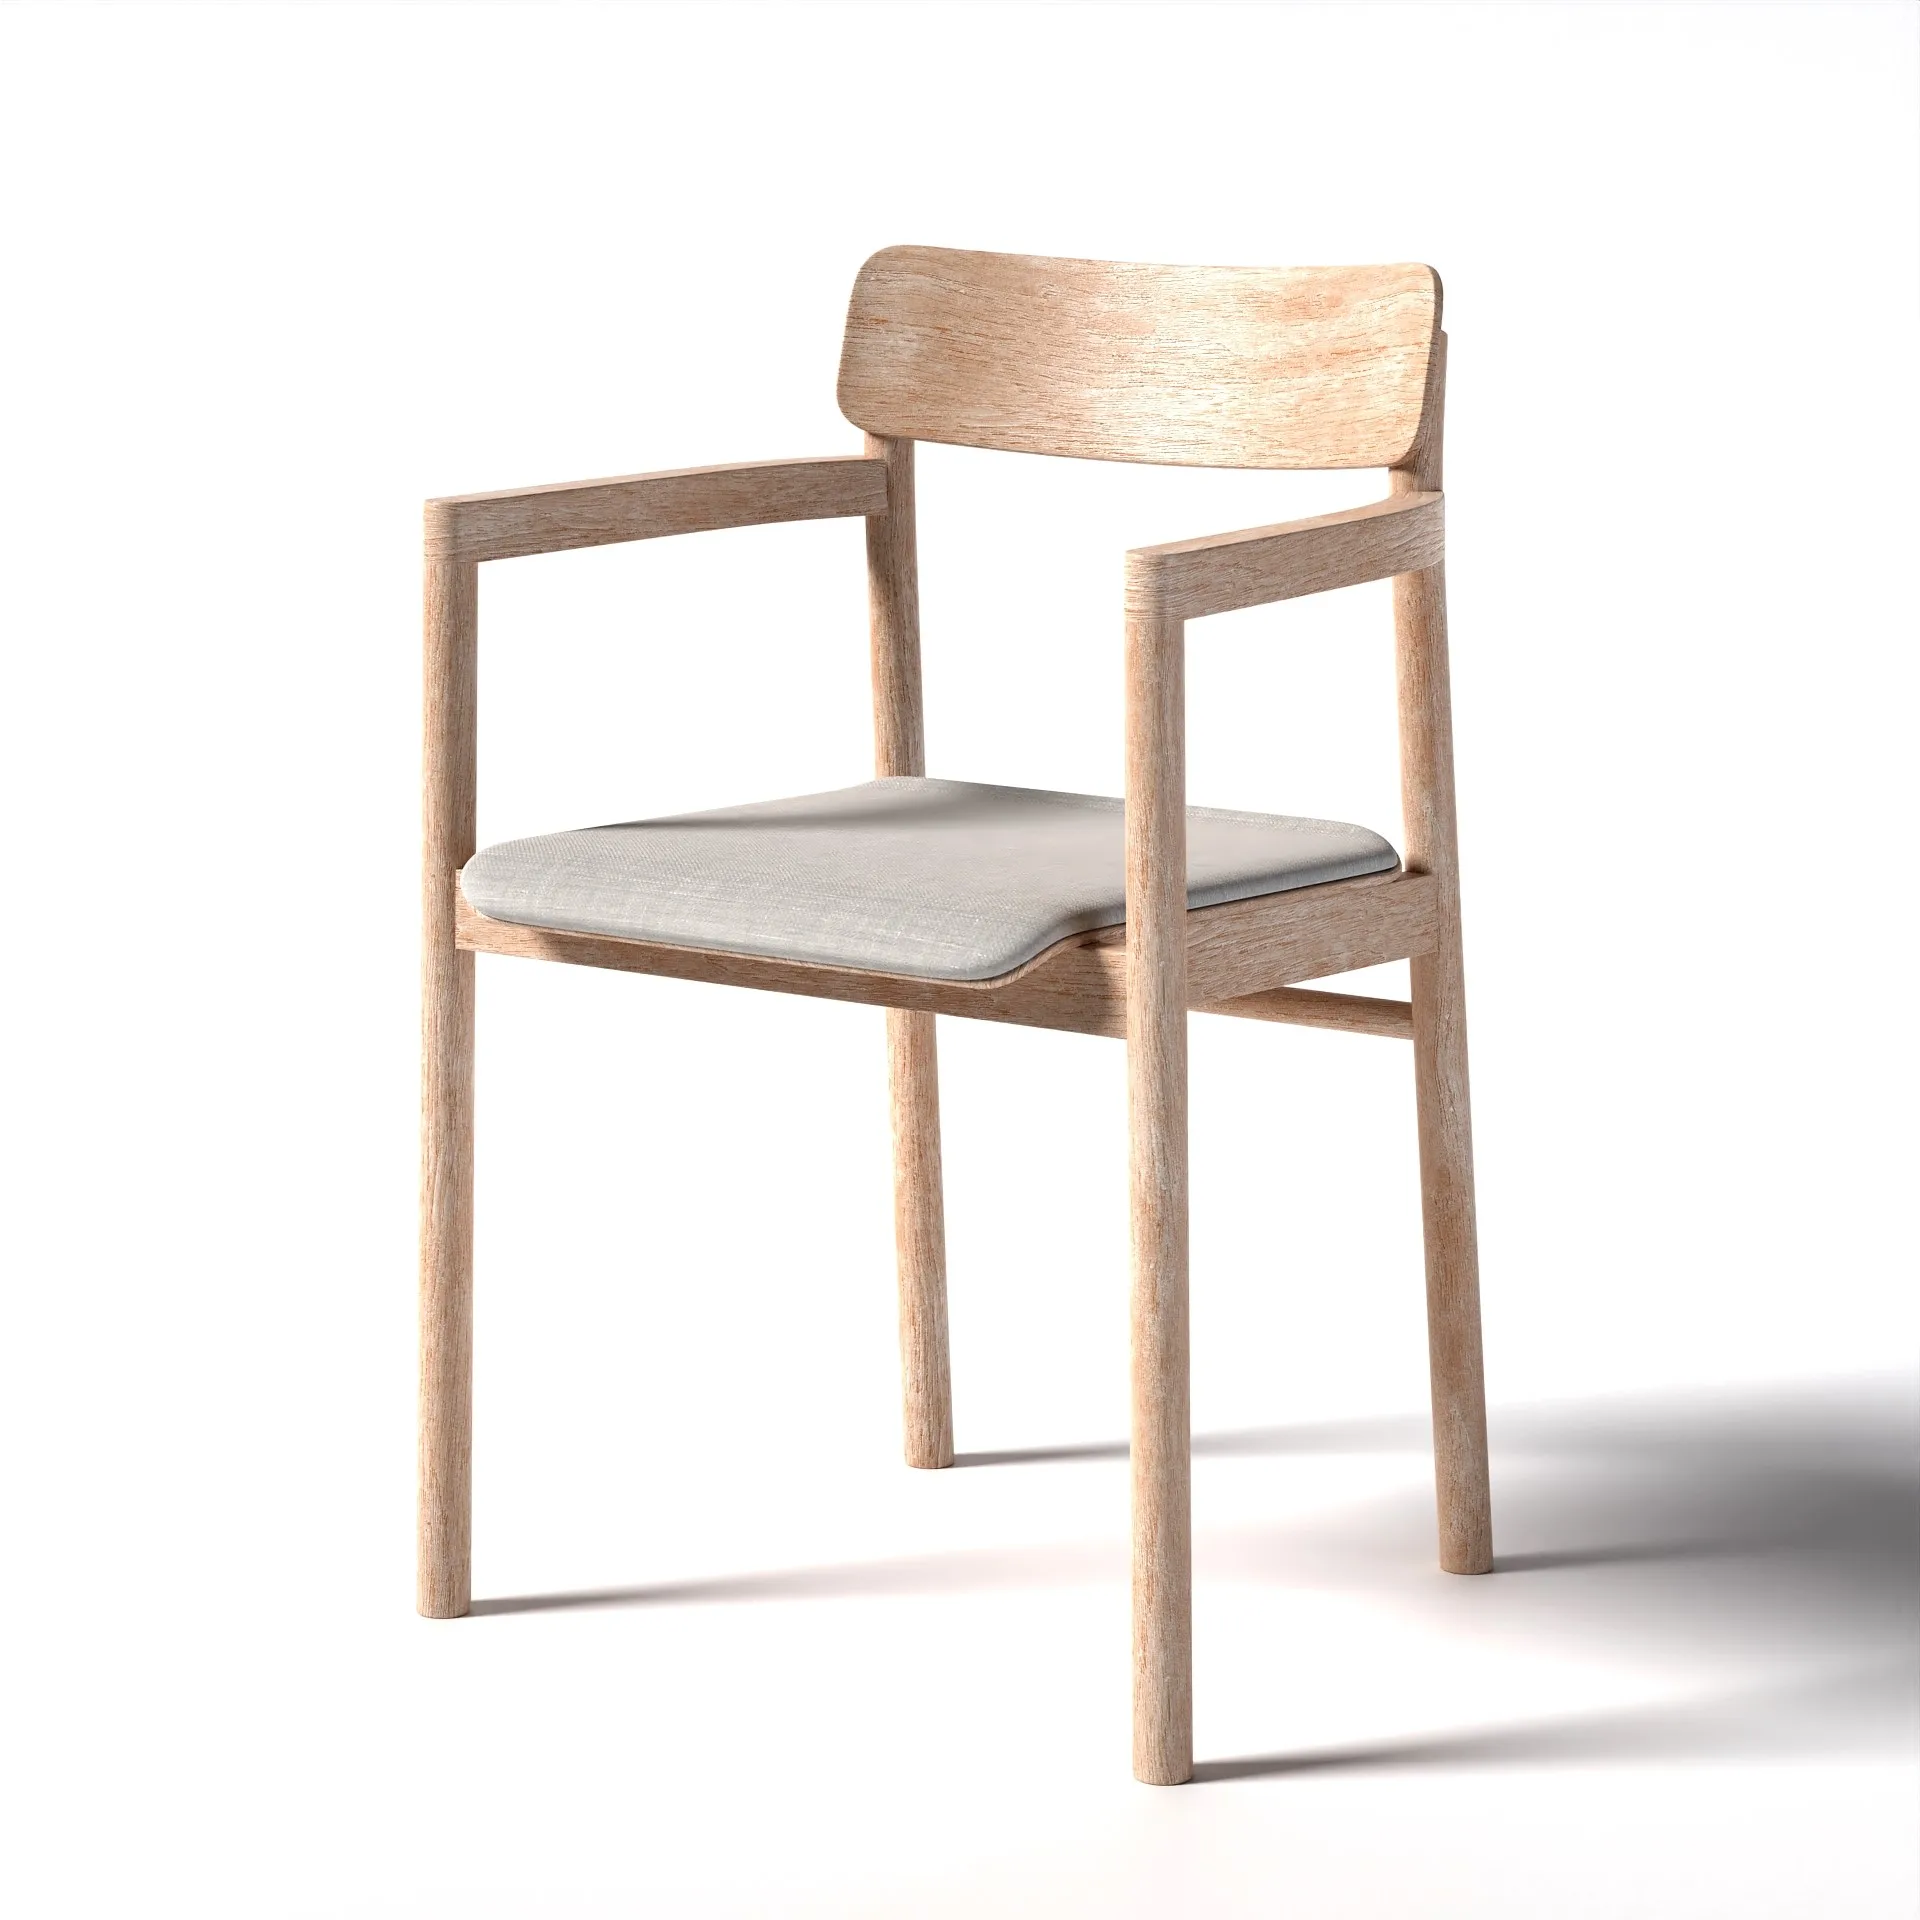 3 model of Fredericia Post Chair by PBRSH